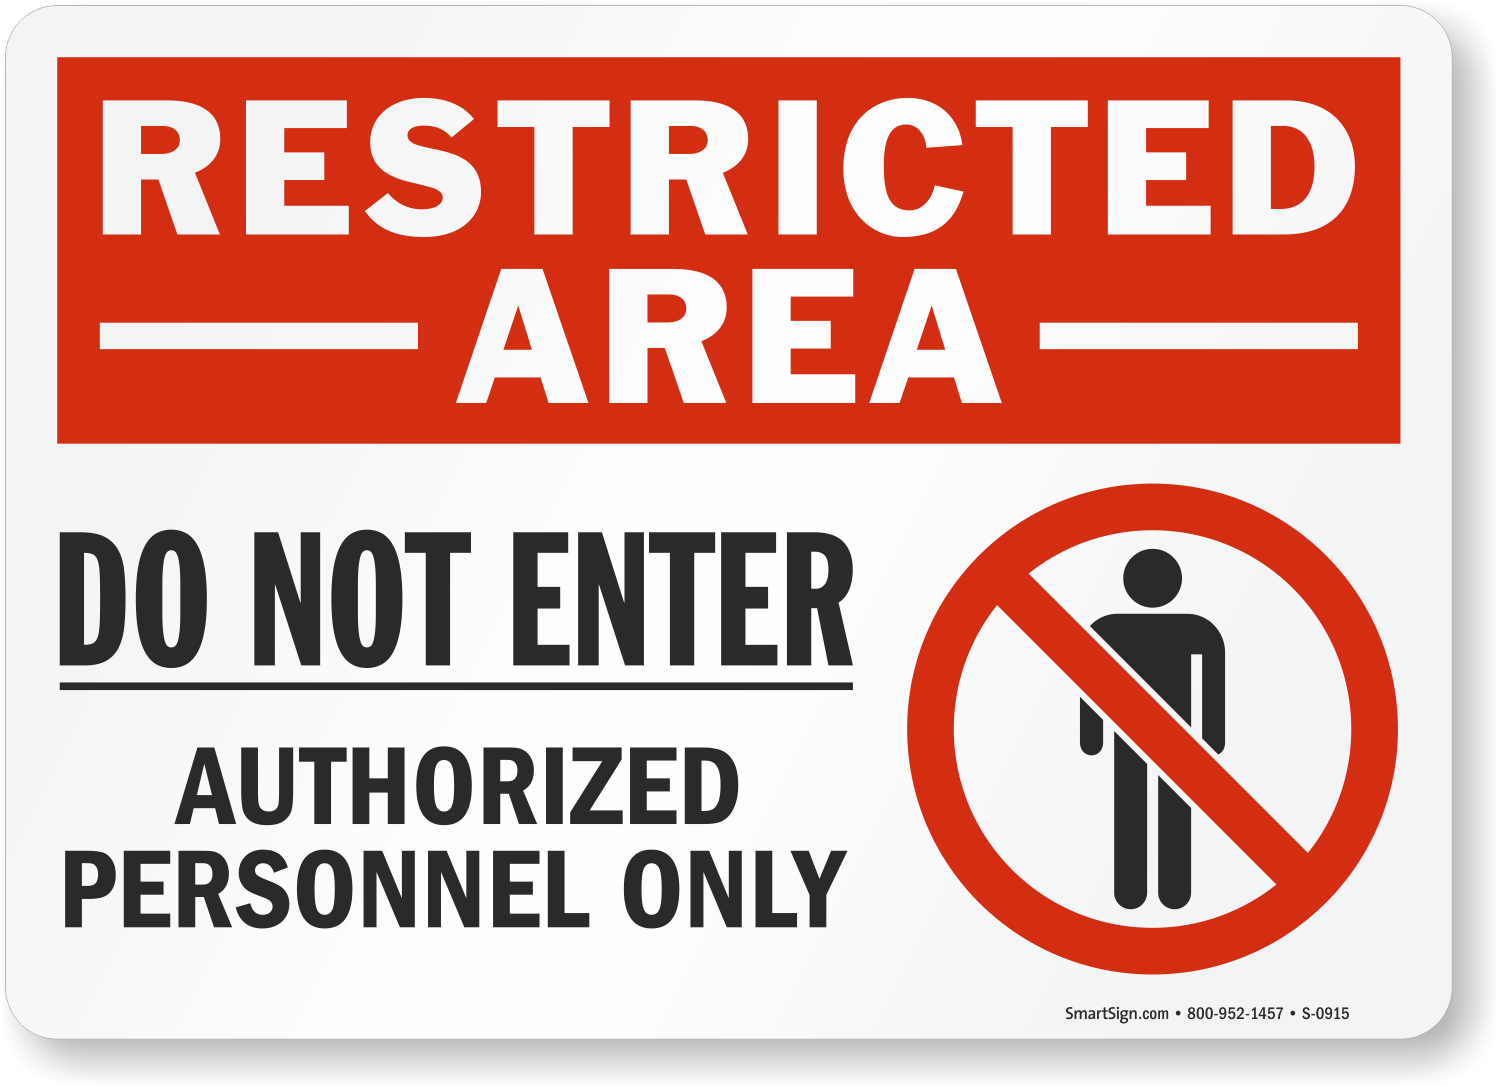 Restricted area sign. Authorized personnel only. Предупреждение restricted. Do not enter authorized personnel only. Allowed posting